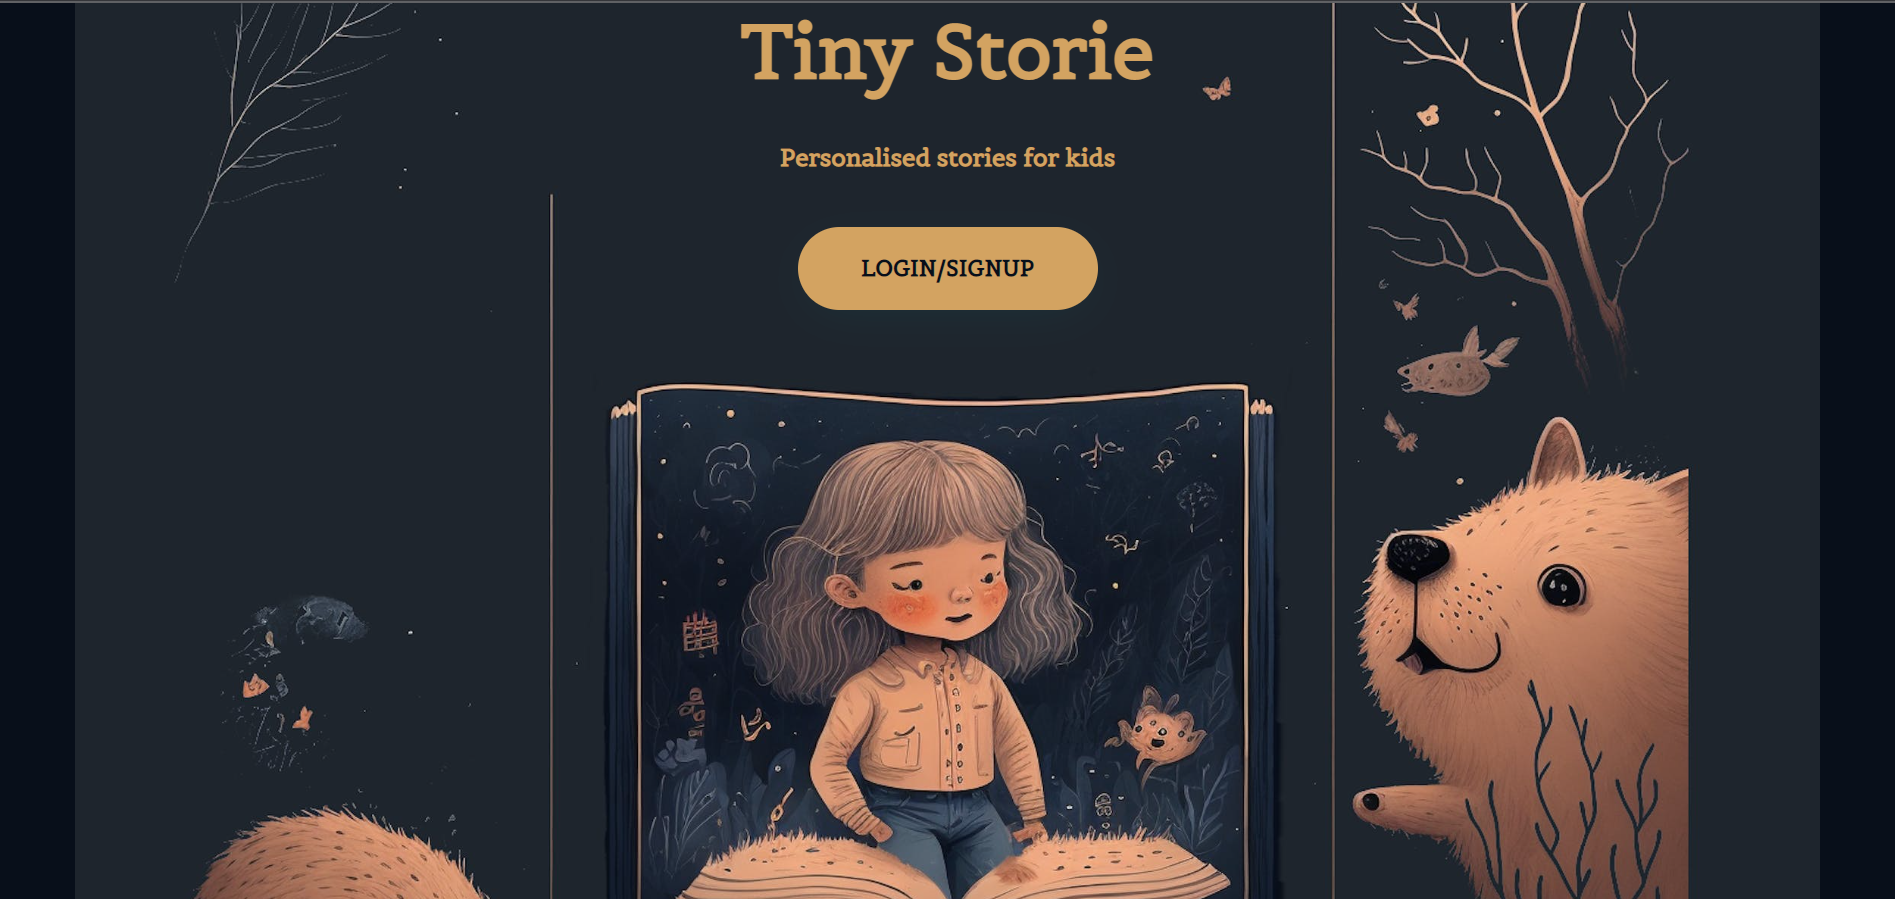 Transform Story Time with Tinystorie.com – The Ultimate Personalized Audio Storytelling Platform for Children!